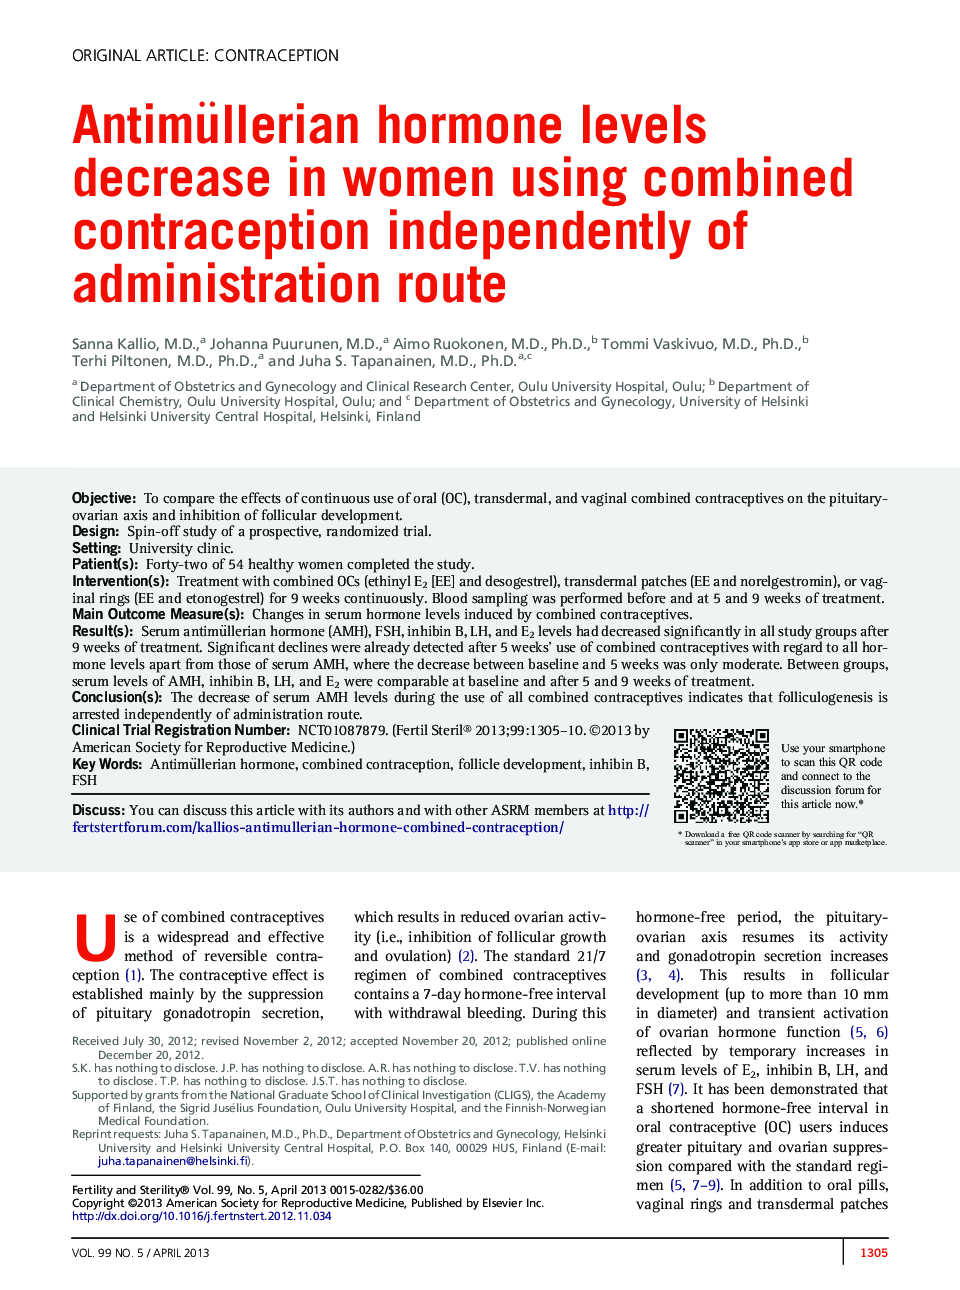 Antimüllerian hormone levels decrease in women using combined contraception independently of administration route 